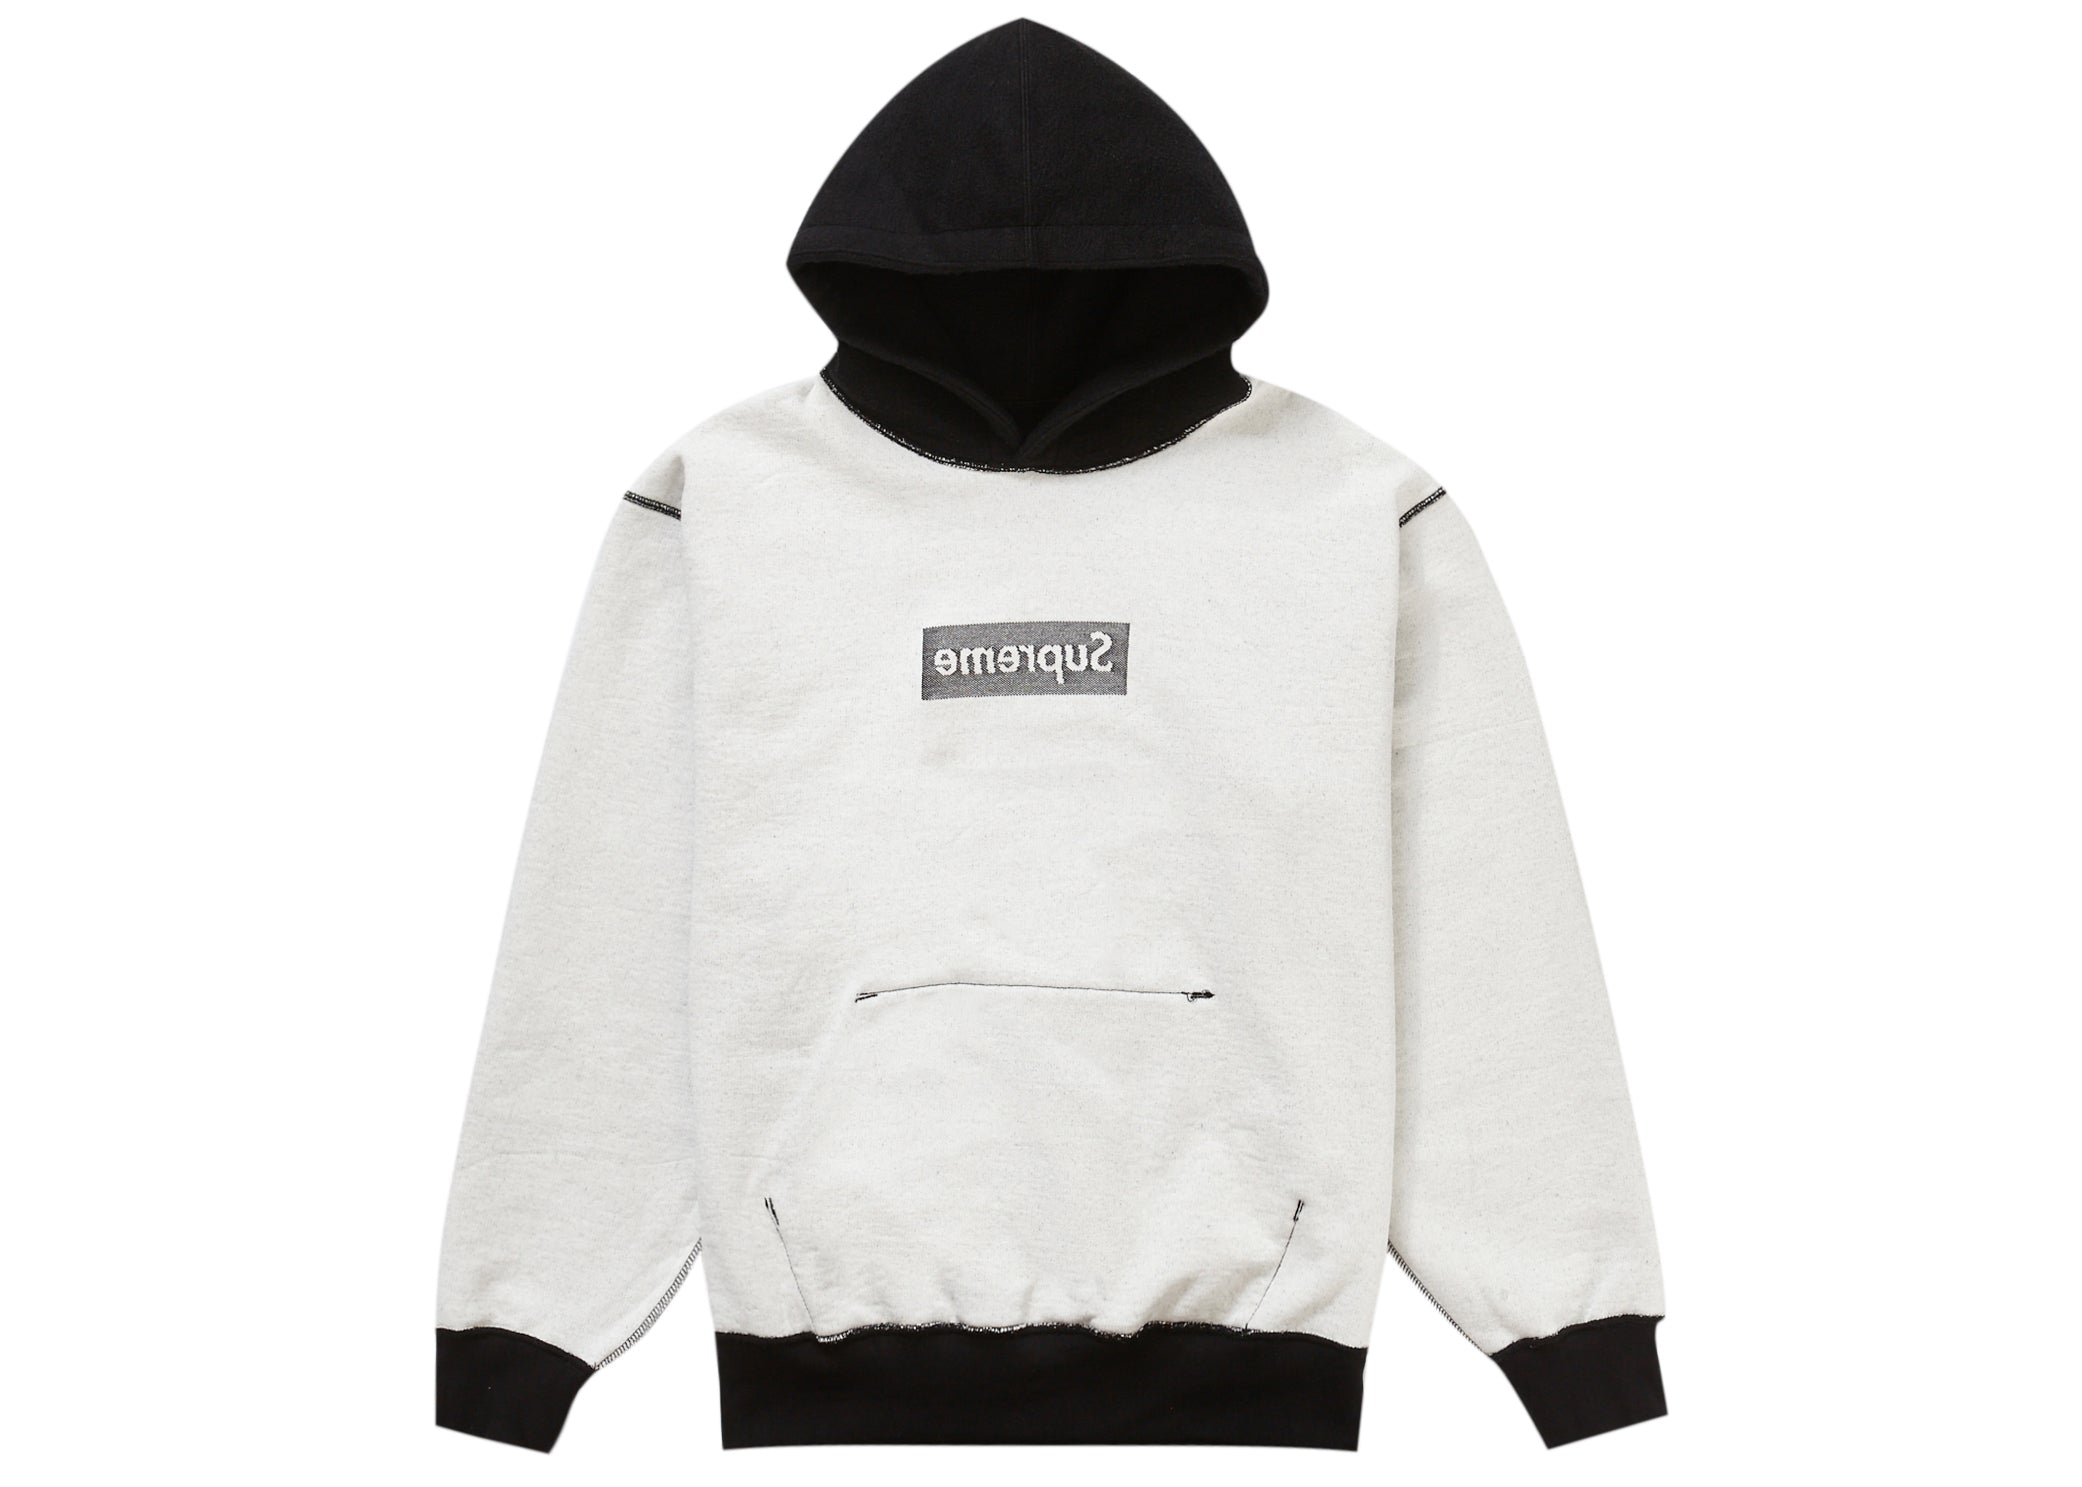 Supreme Inside Out Box Logo Hooded Sweatshirt Black S, M, L in Hand 